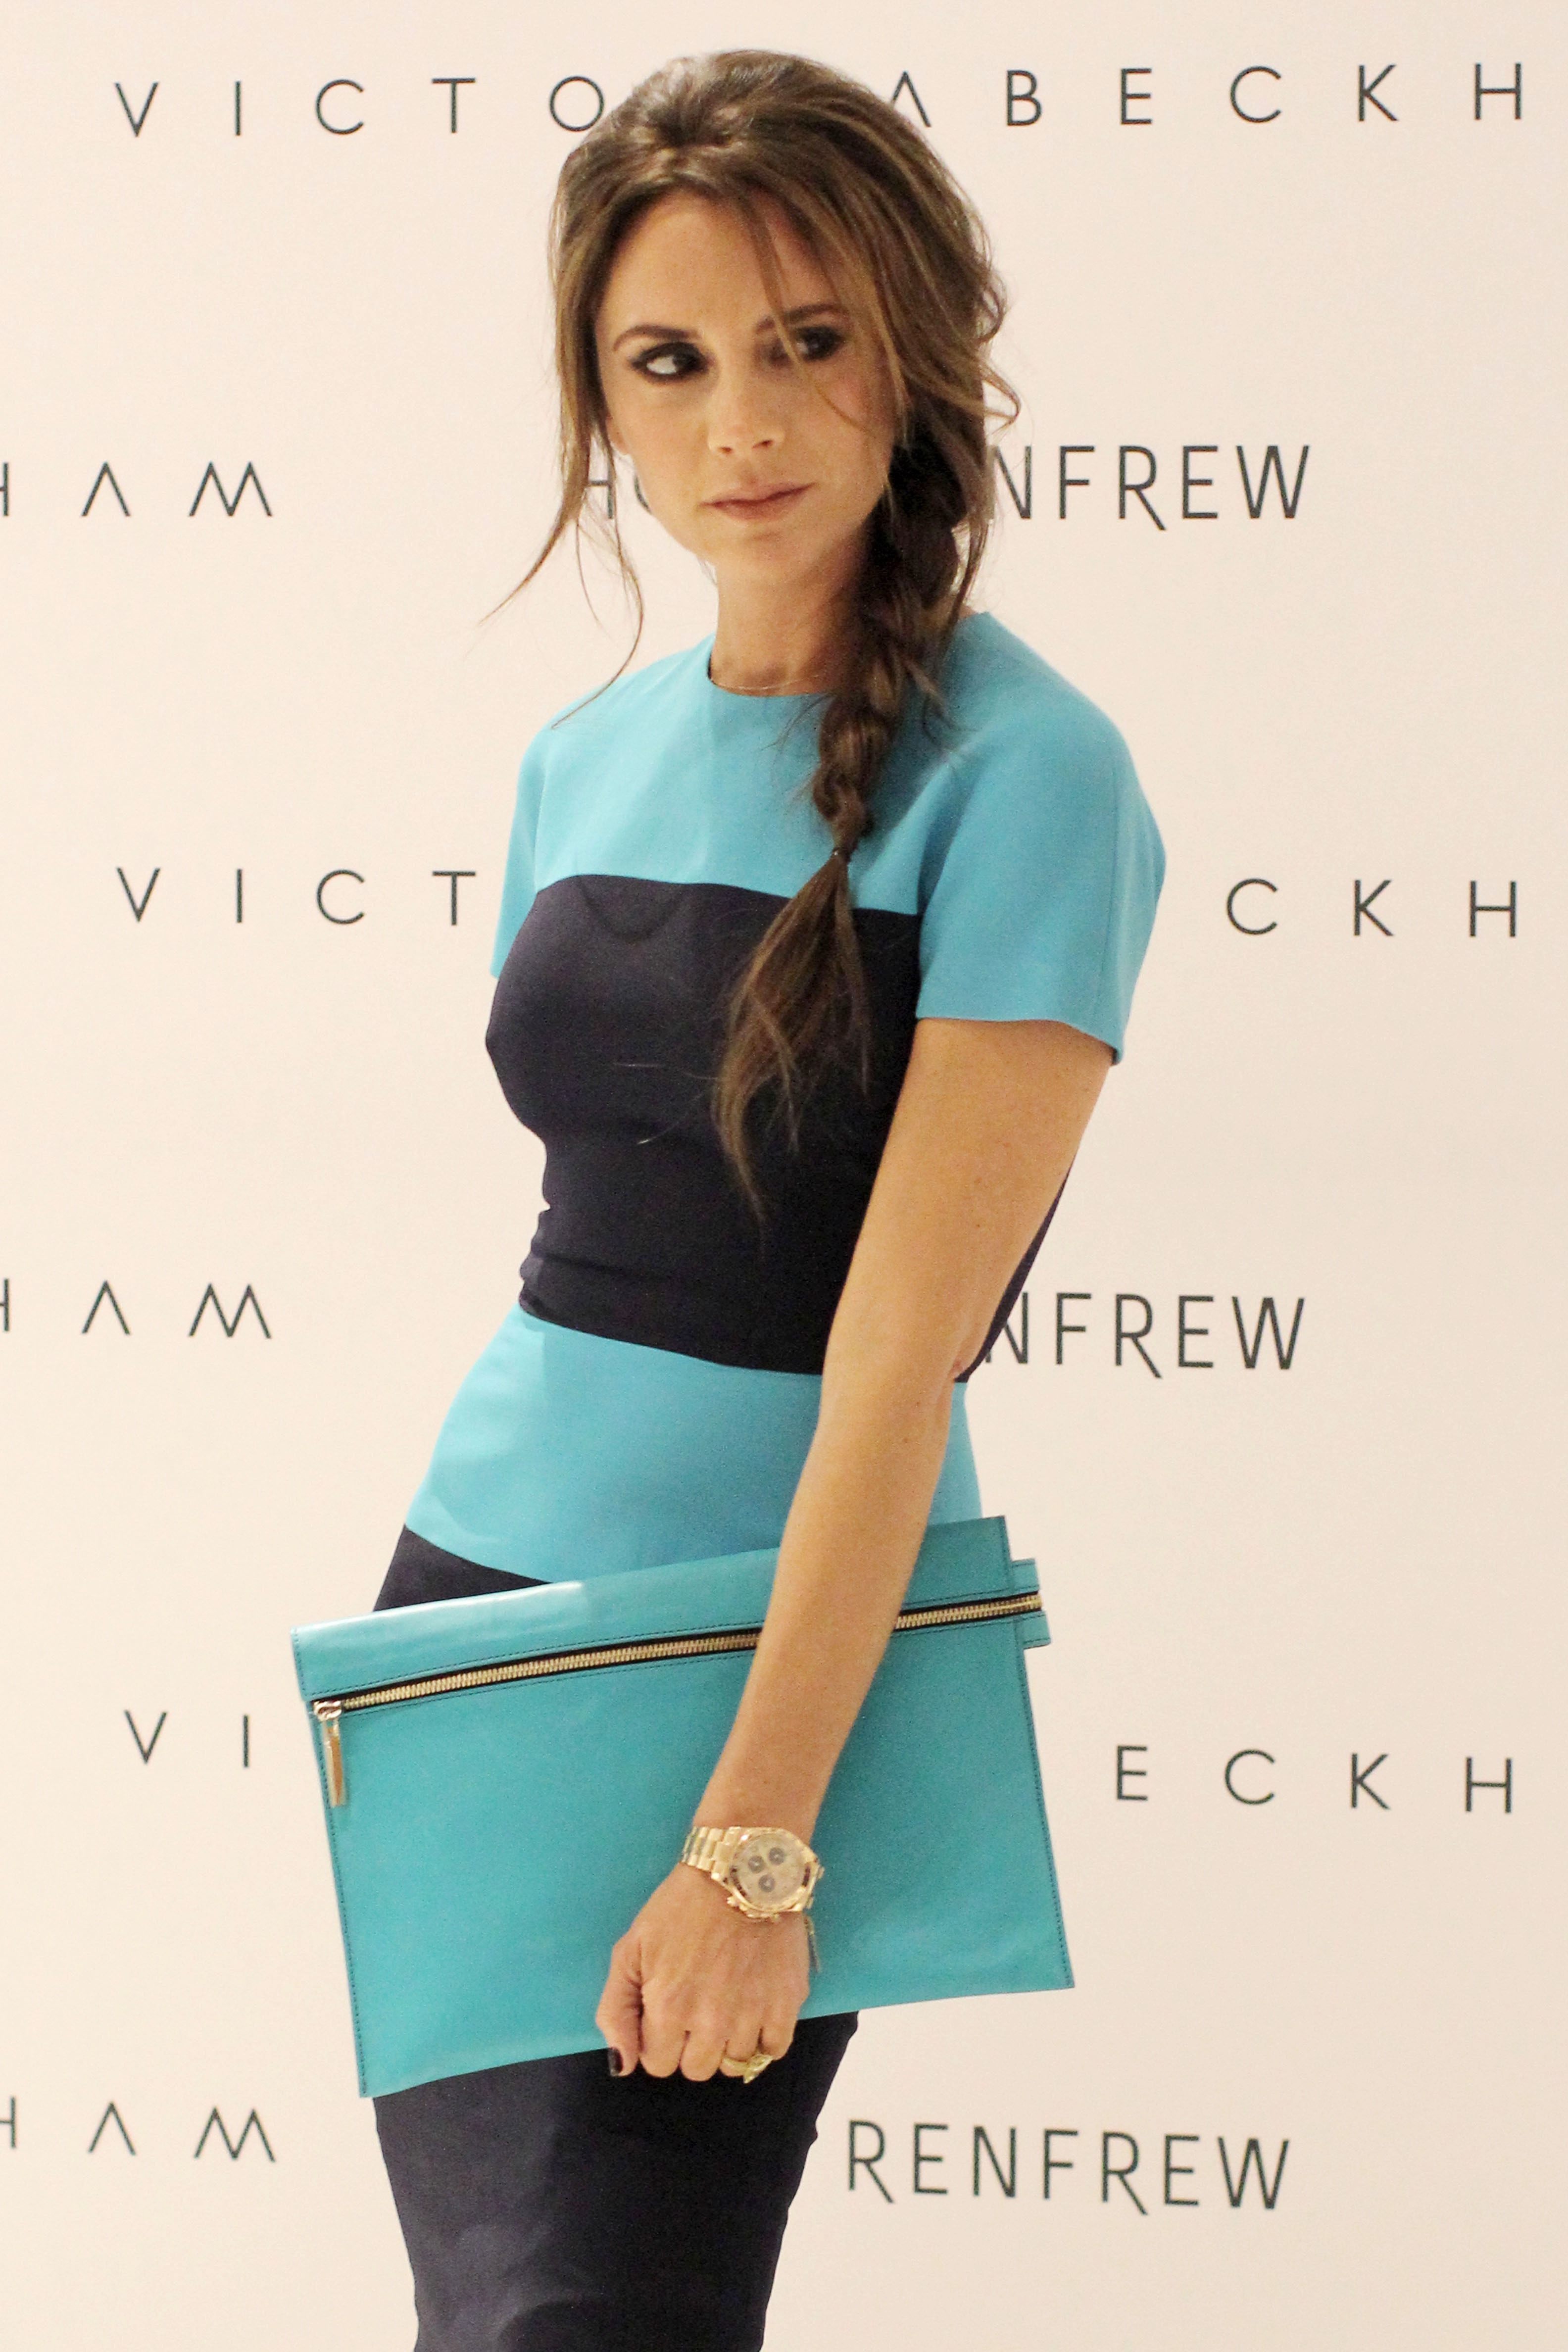 FLYNET – Victoria Beckham Releases Her 2013 Fall Fashion Line In Canada